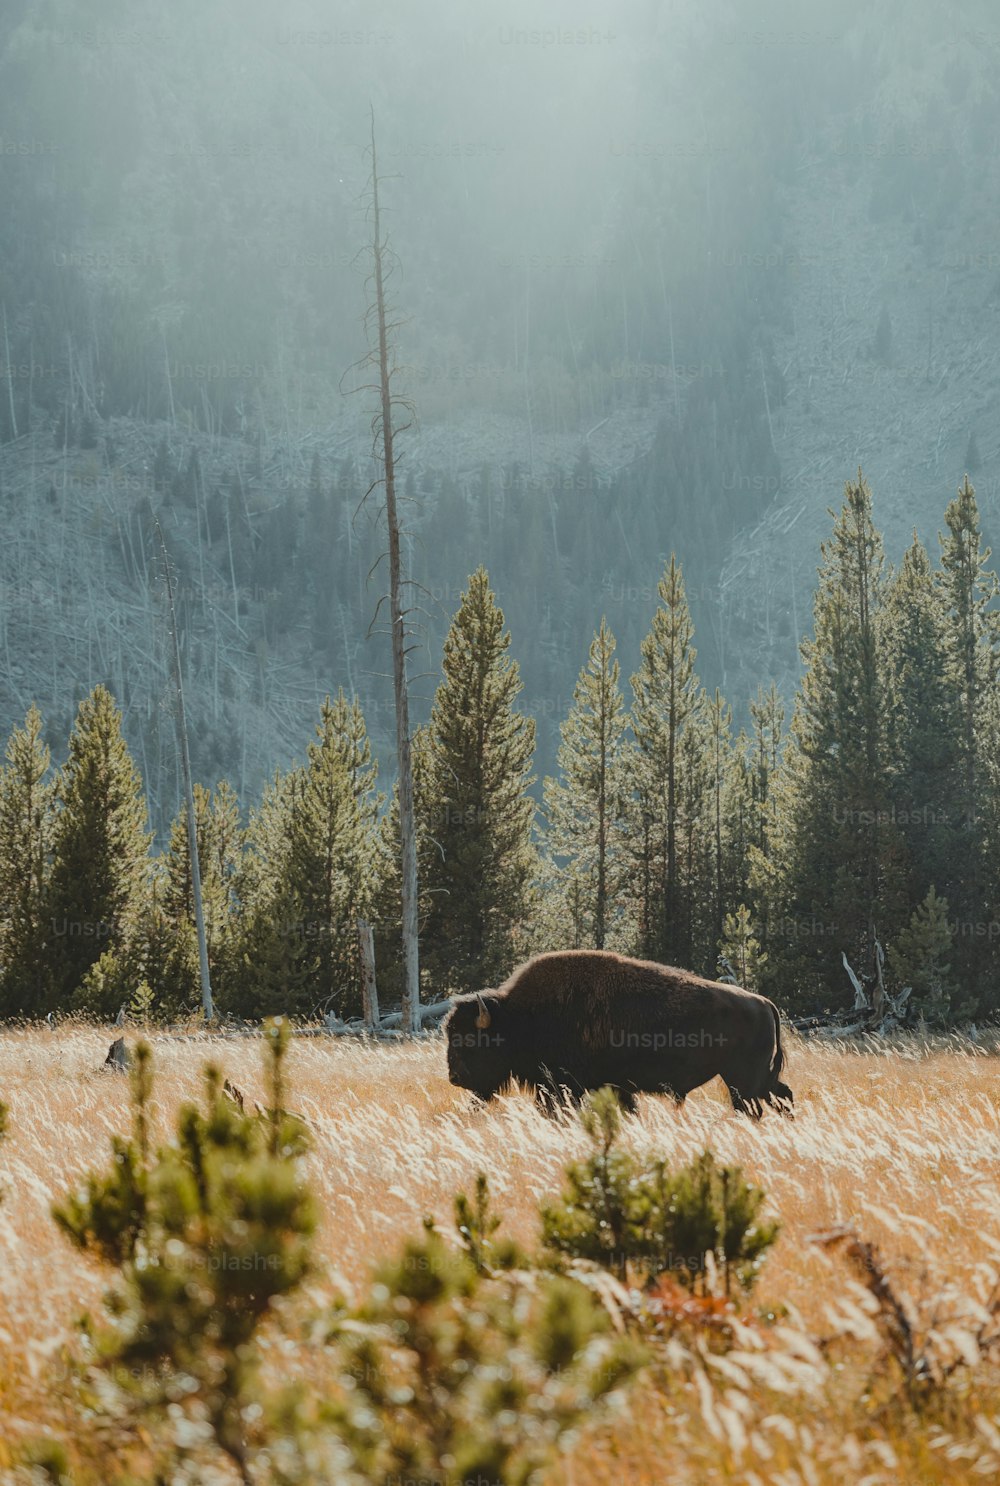 a bison in a field with trees in the background